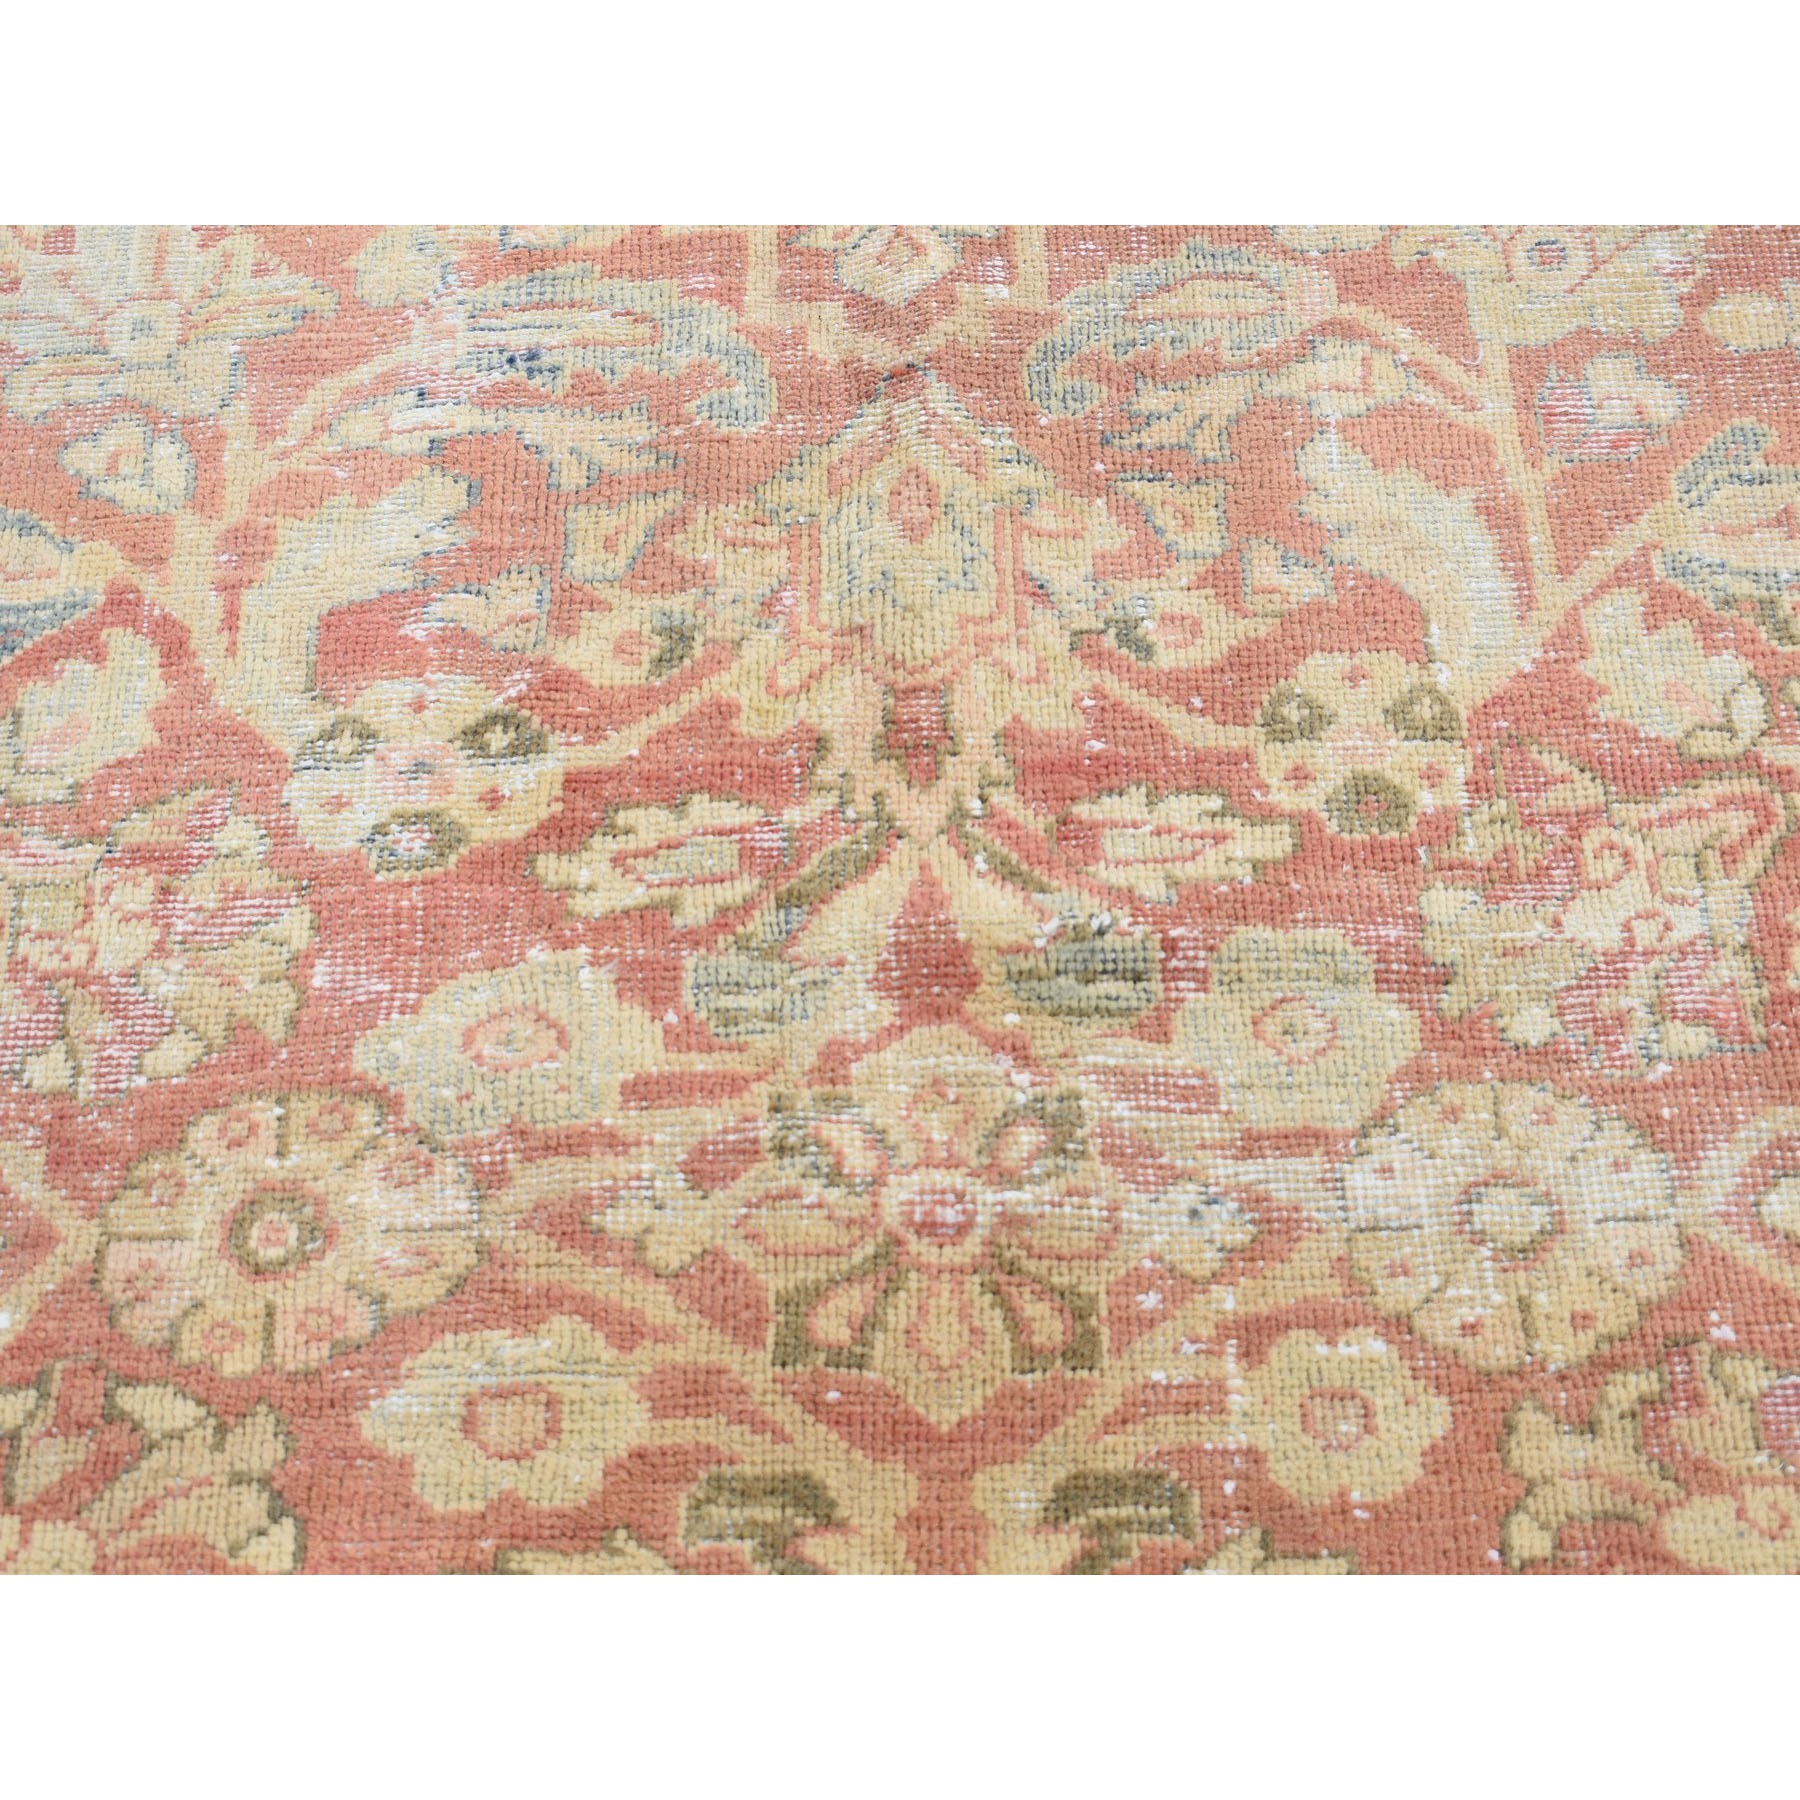 10-3 x13-8  Coral Antique And Worn Persian Mahal Hand Knotted Oriental Rug 